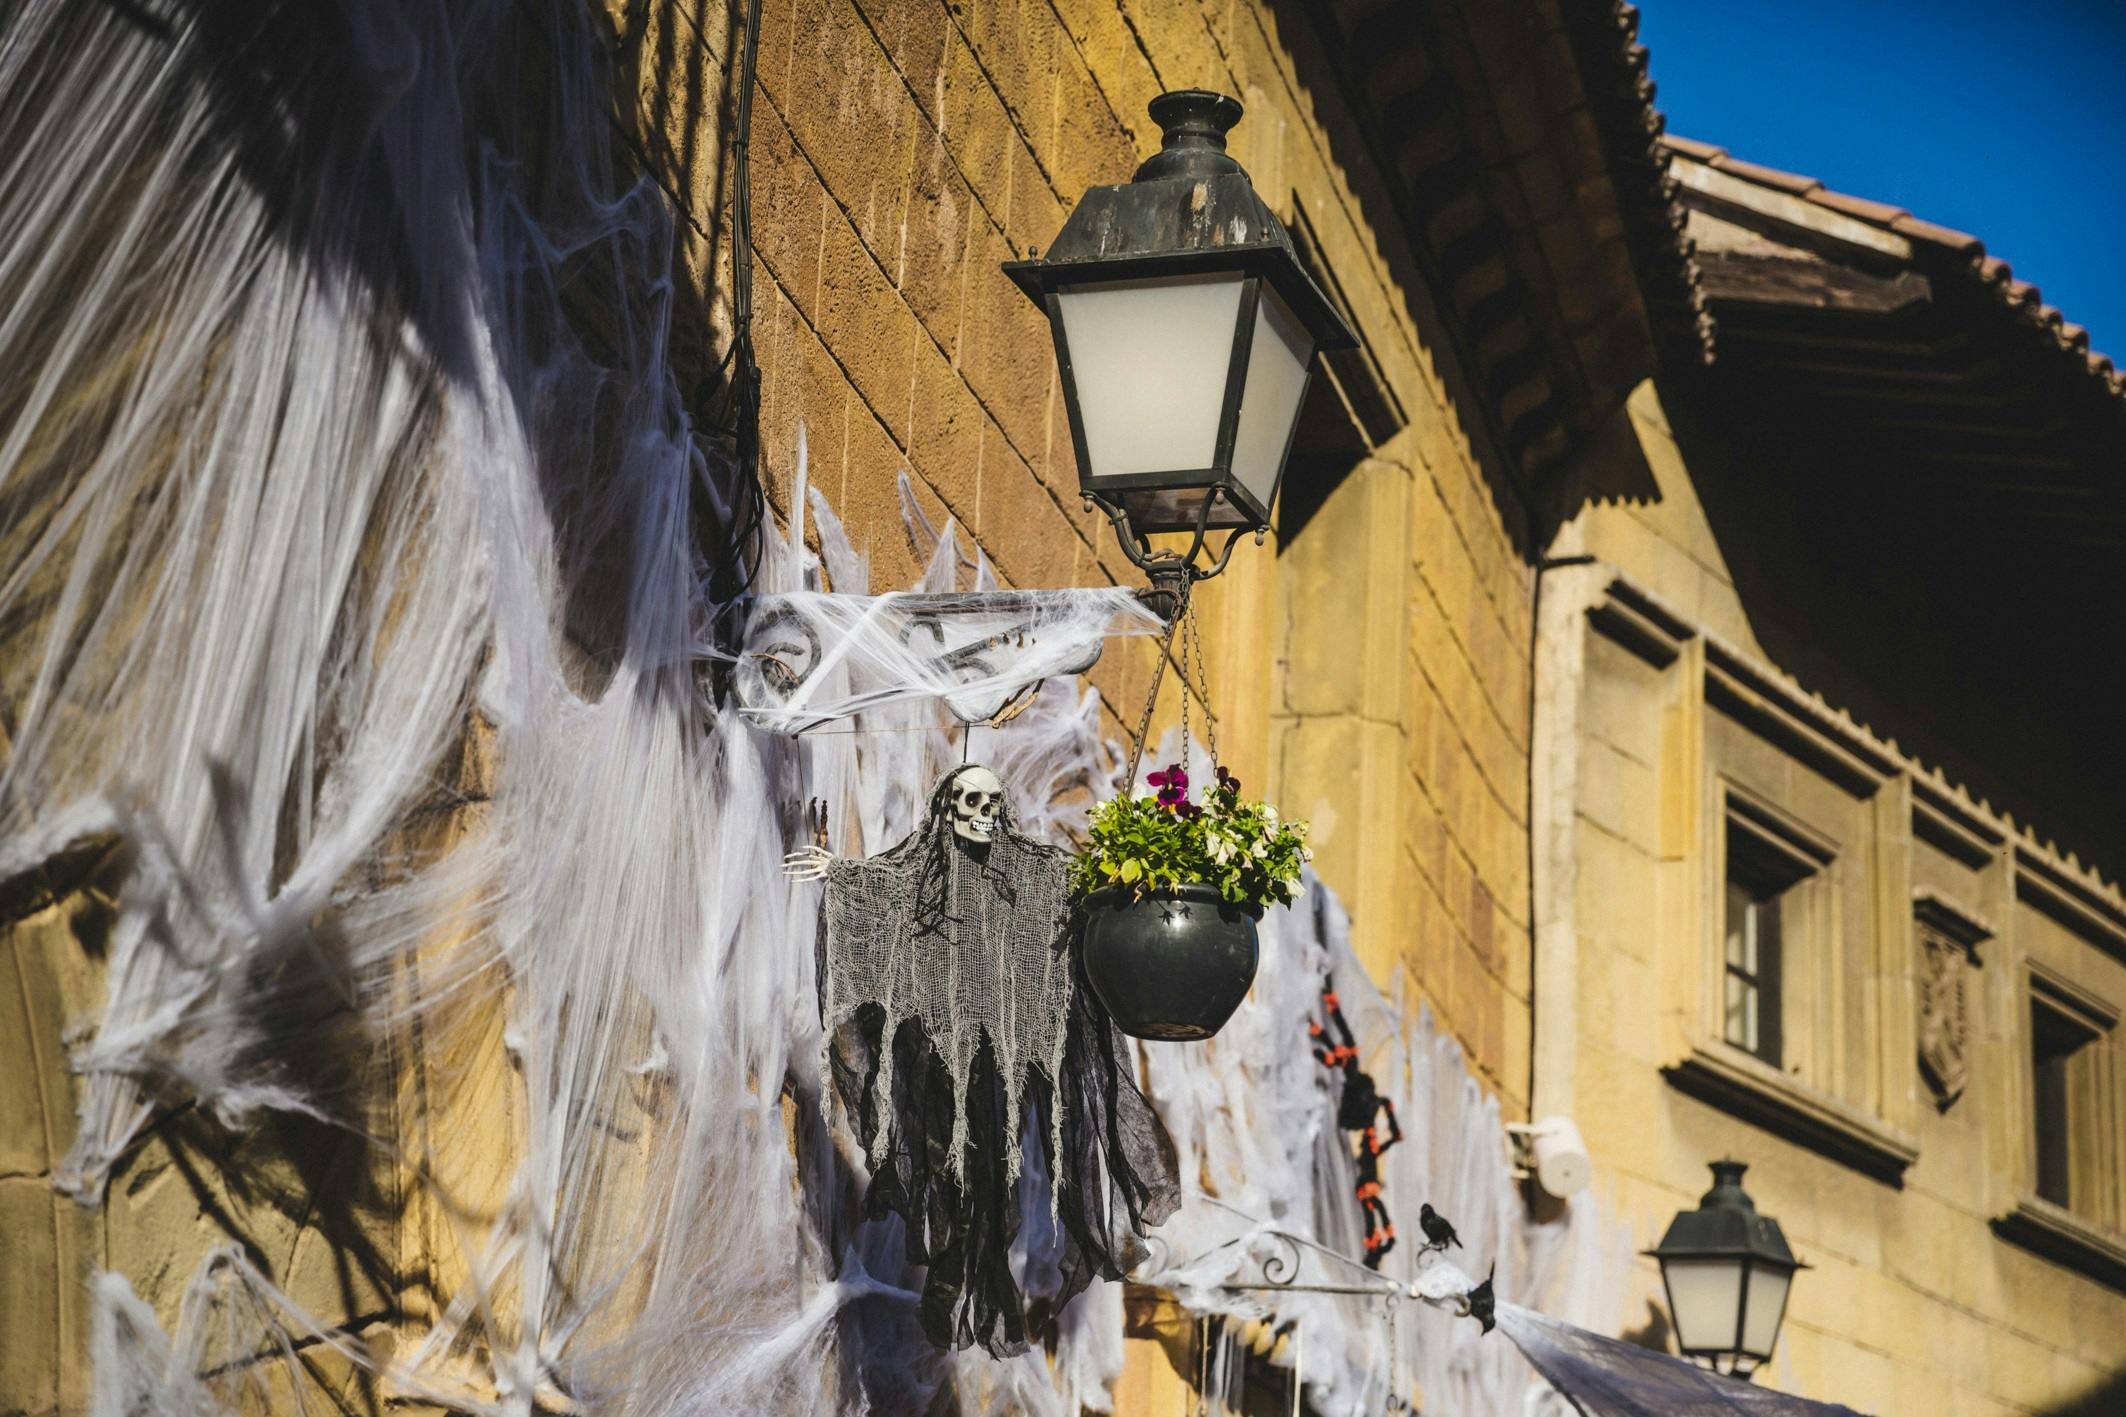 Poble Espanyol Halloween party and Tunnel of Terror skip-the-line tickets boeken?